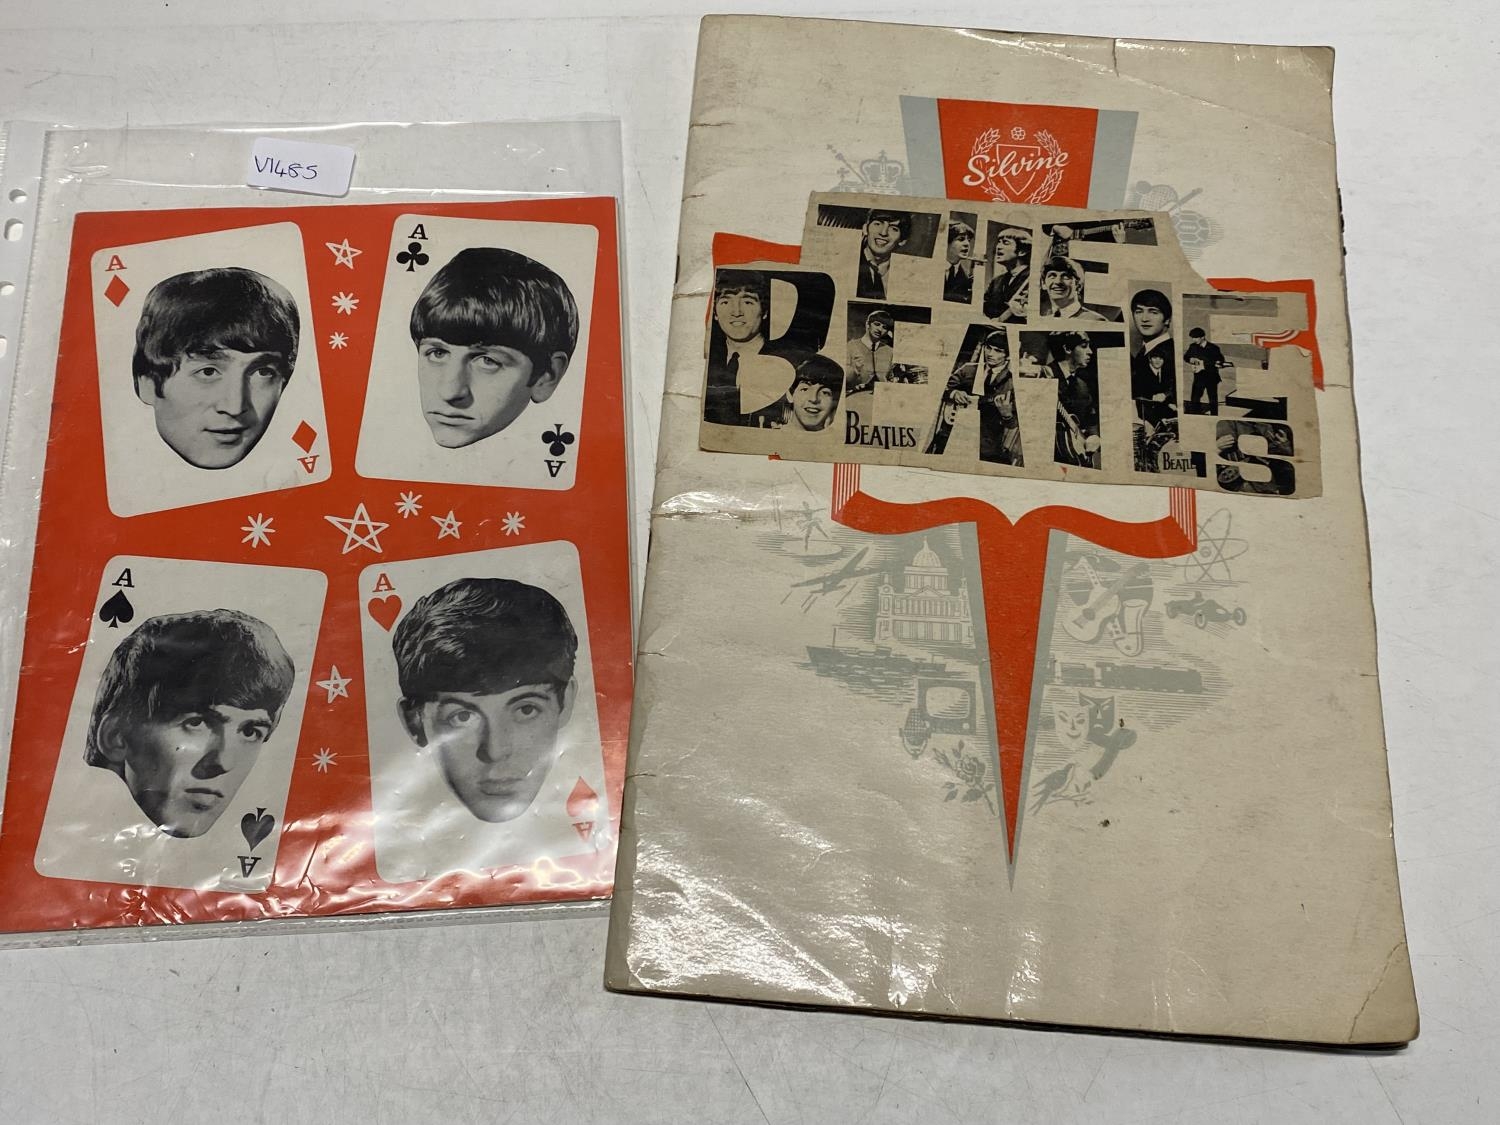 The Beatles Four Aces Mary Well UK tour programme with a Beatles scrapbook various ephemera and